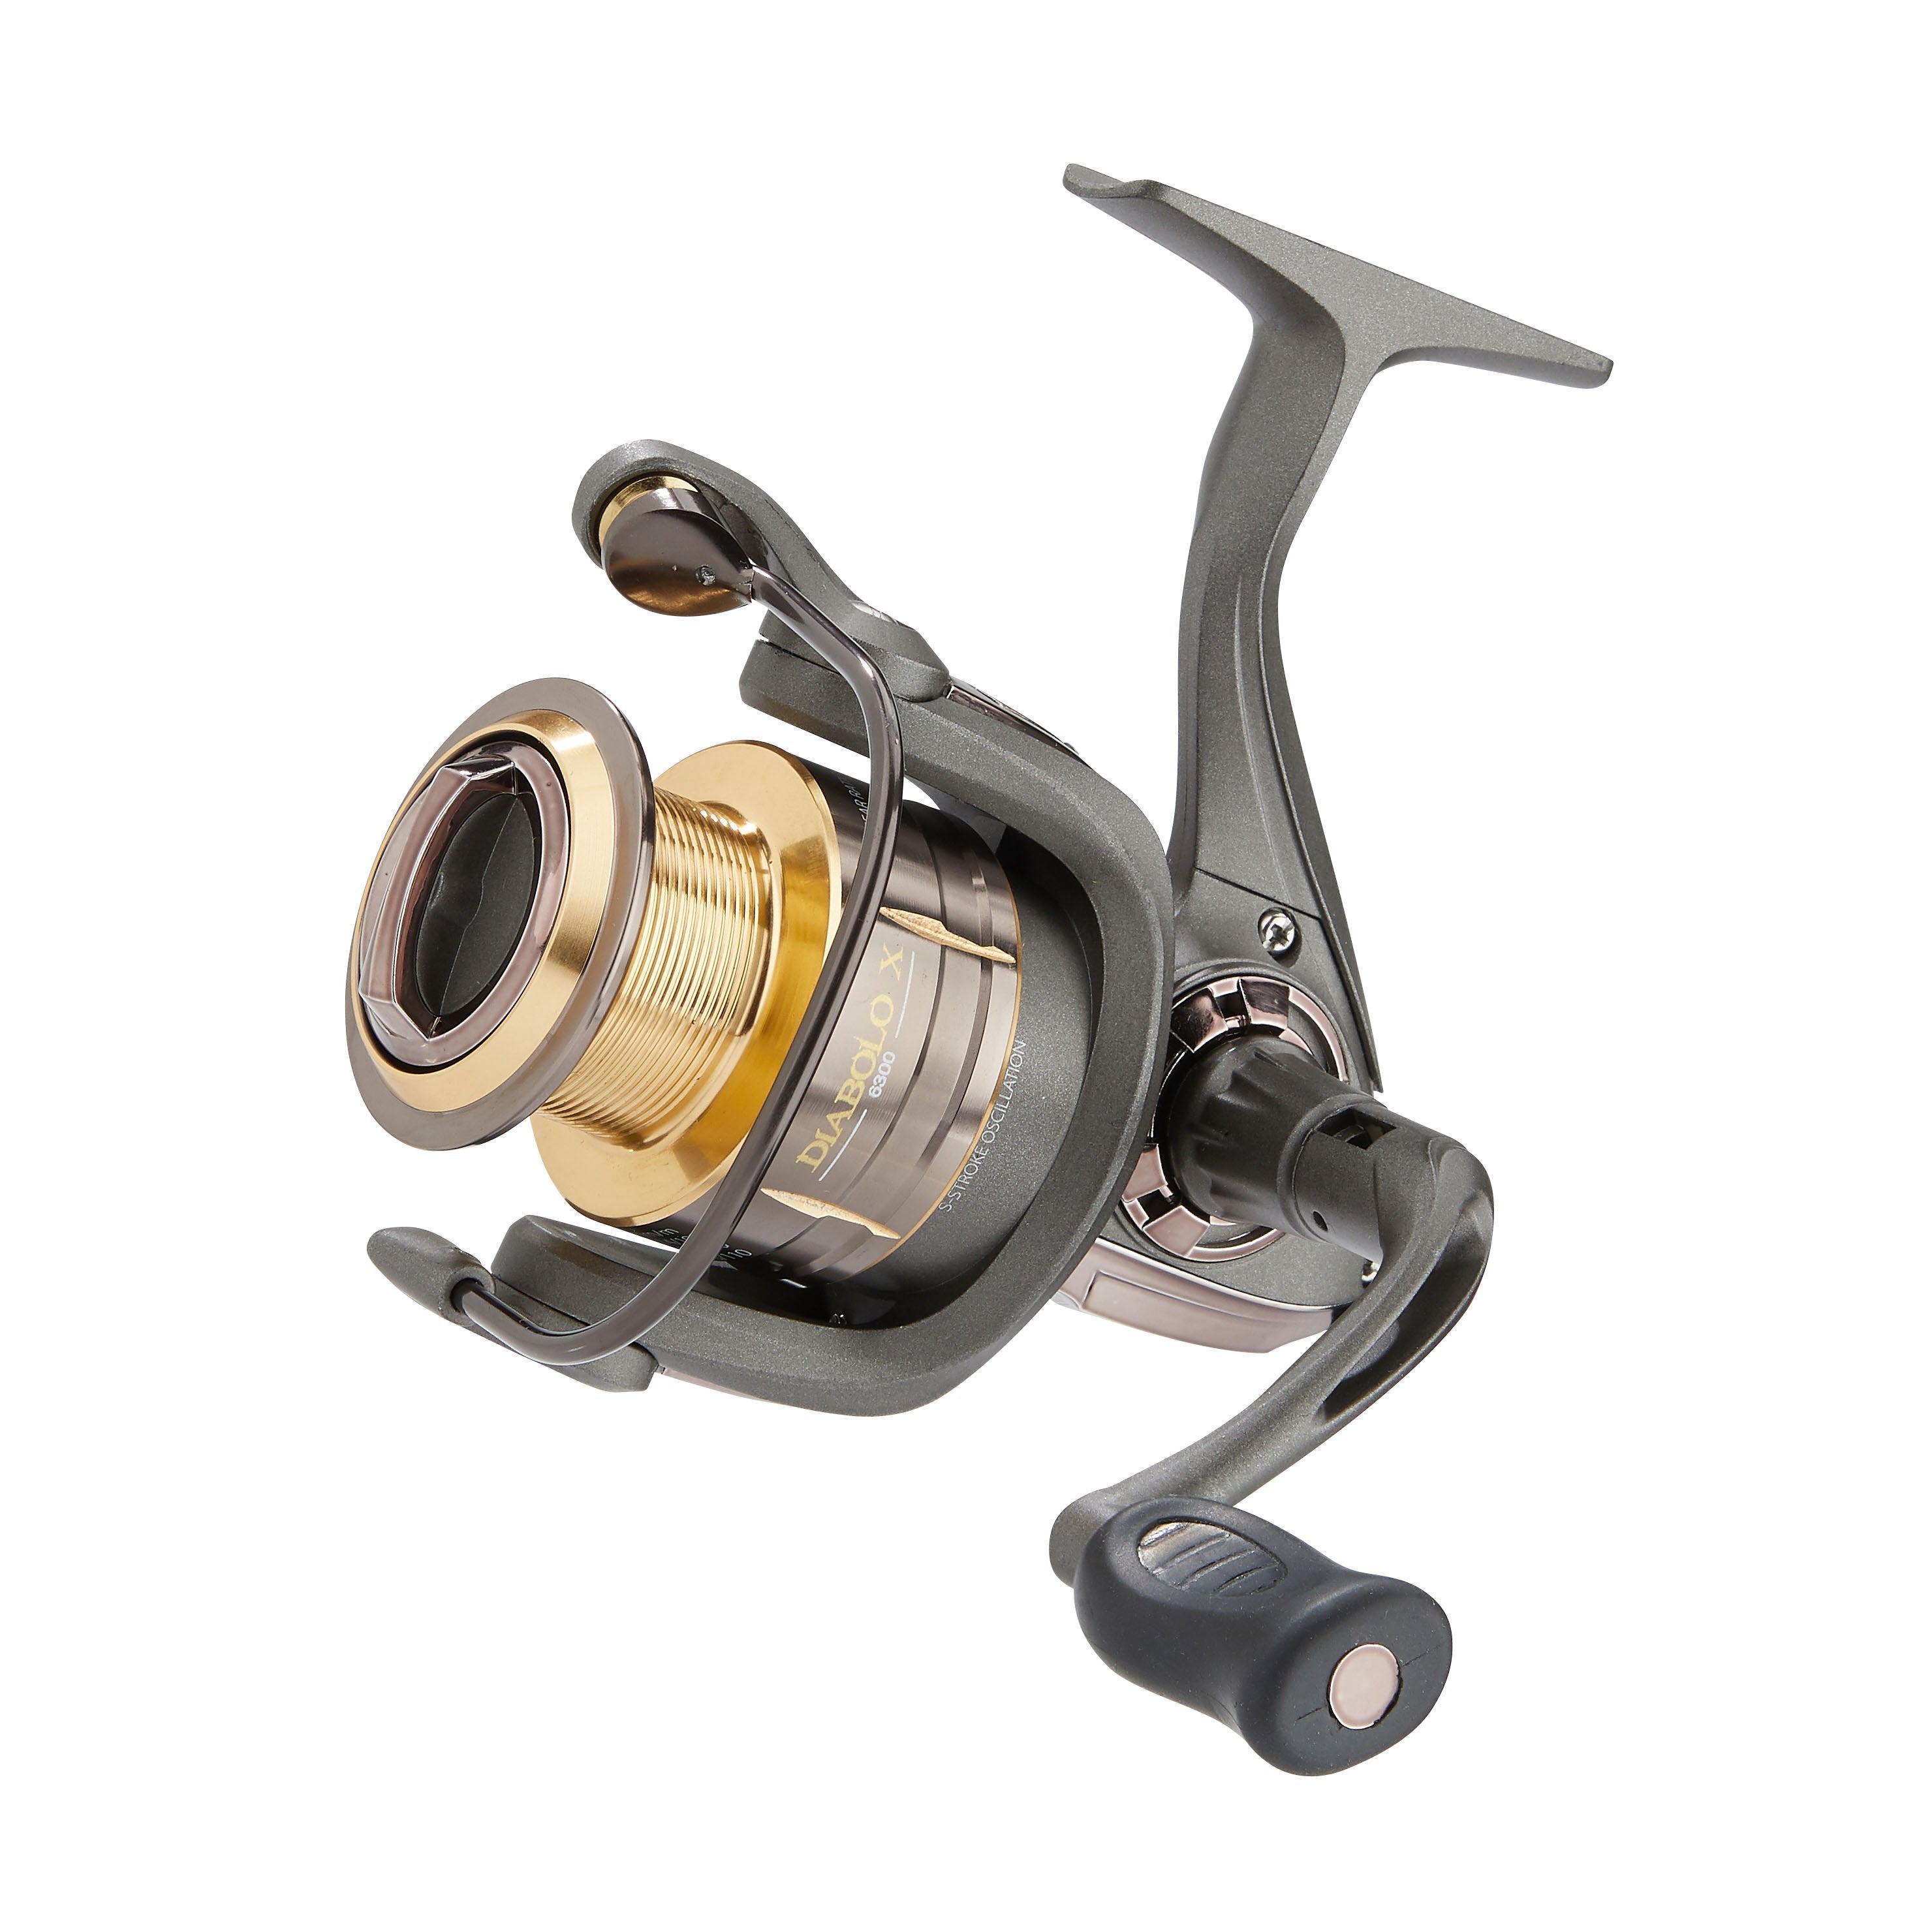 SPRO Trout Master Tactical Reel - Green Blue Outdoors